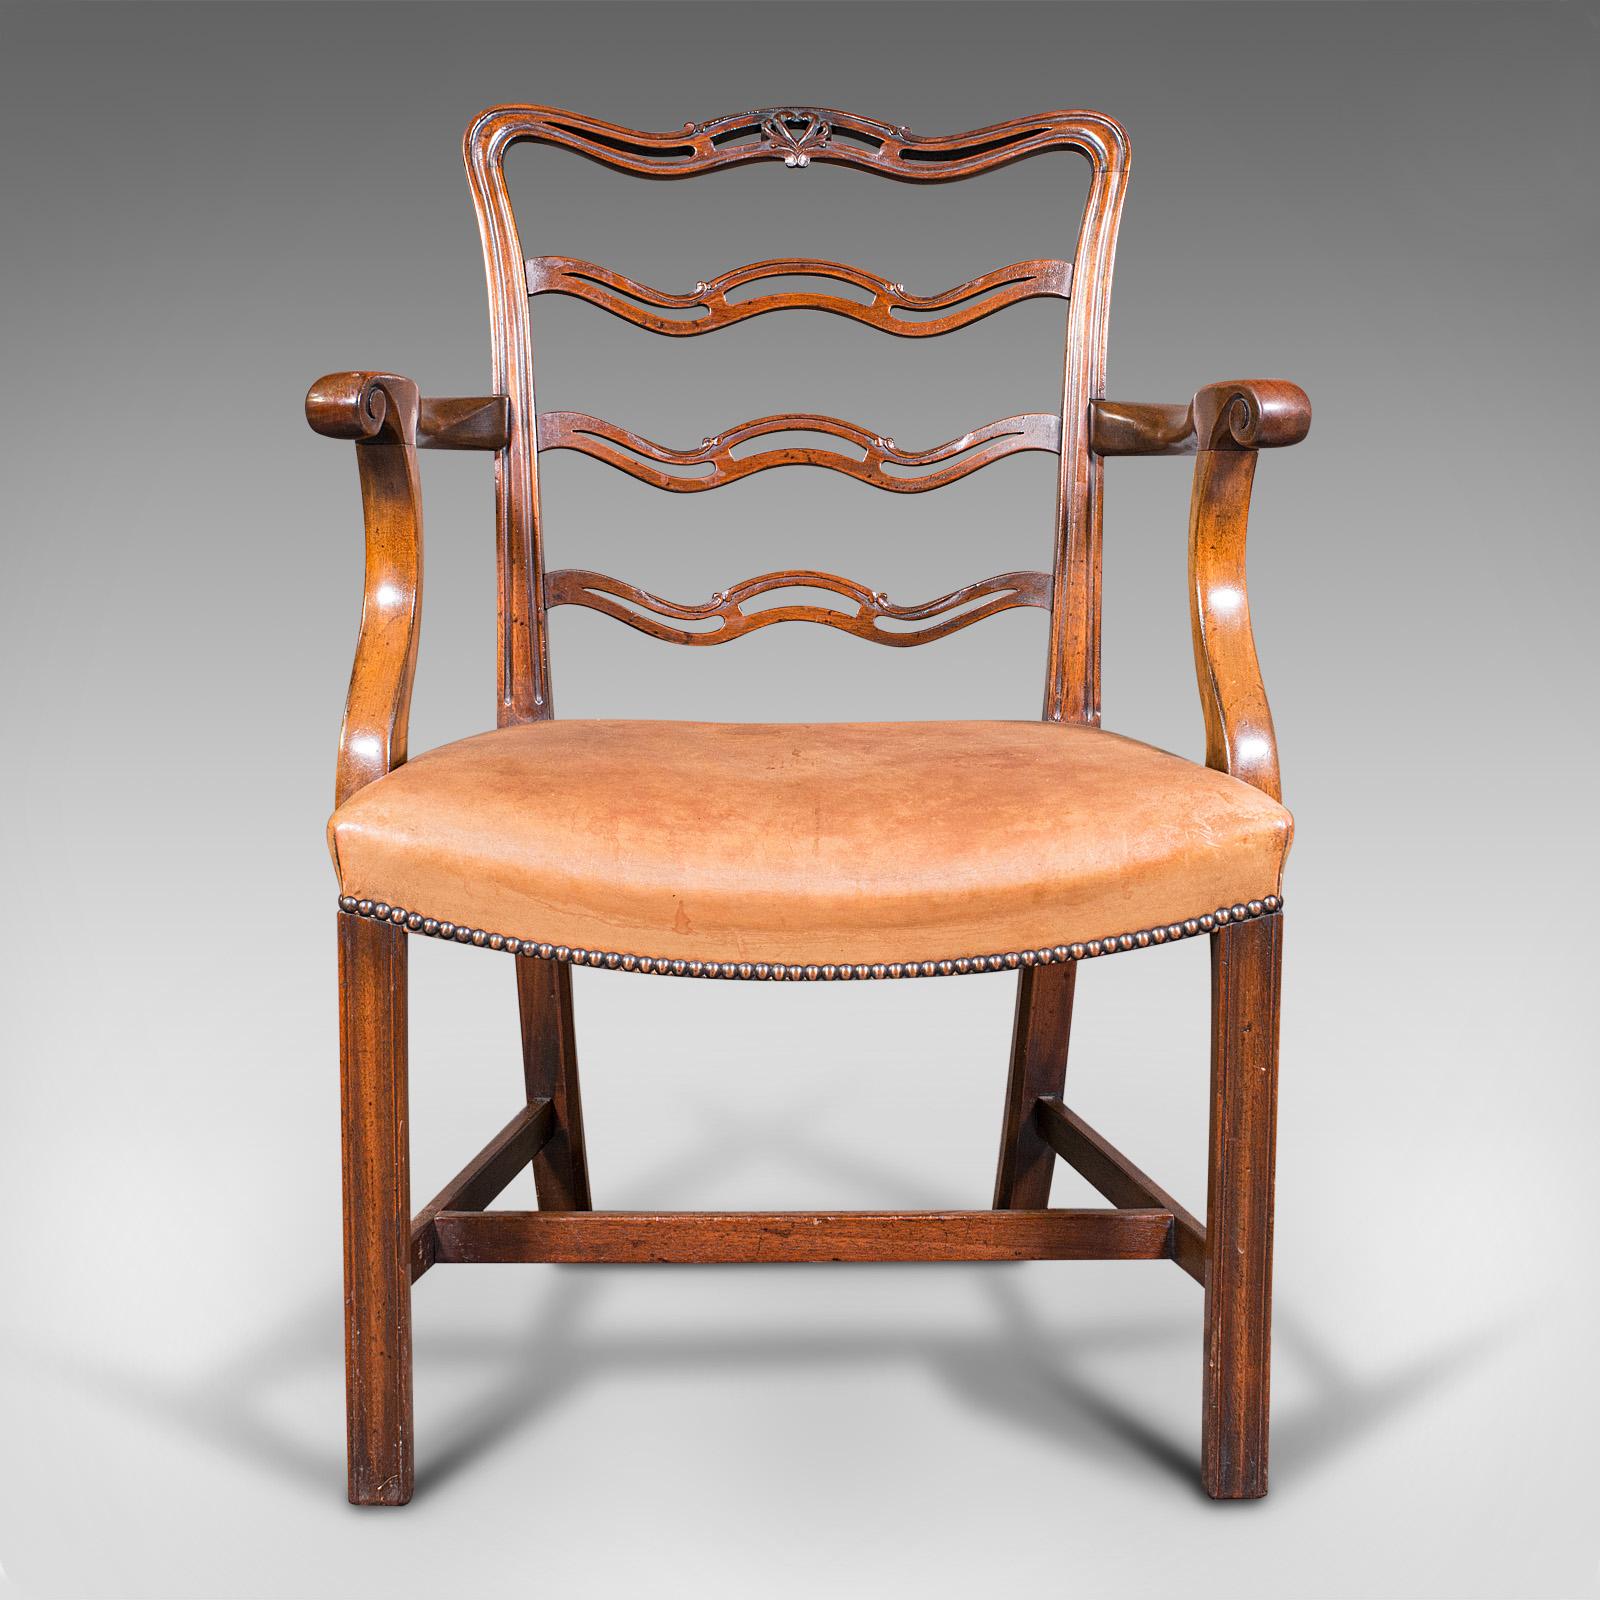 This is a vintage ladder back study chair. An Irish, mahogany elbow seat or carver, dating to the Art Deco period, circa 1940.

Striking chair in Irish Chippendale revival taste
Of generously wide profile for comfortable modern use
Displaying a